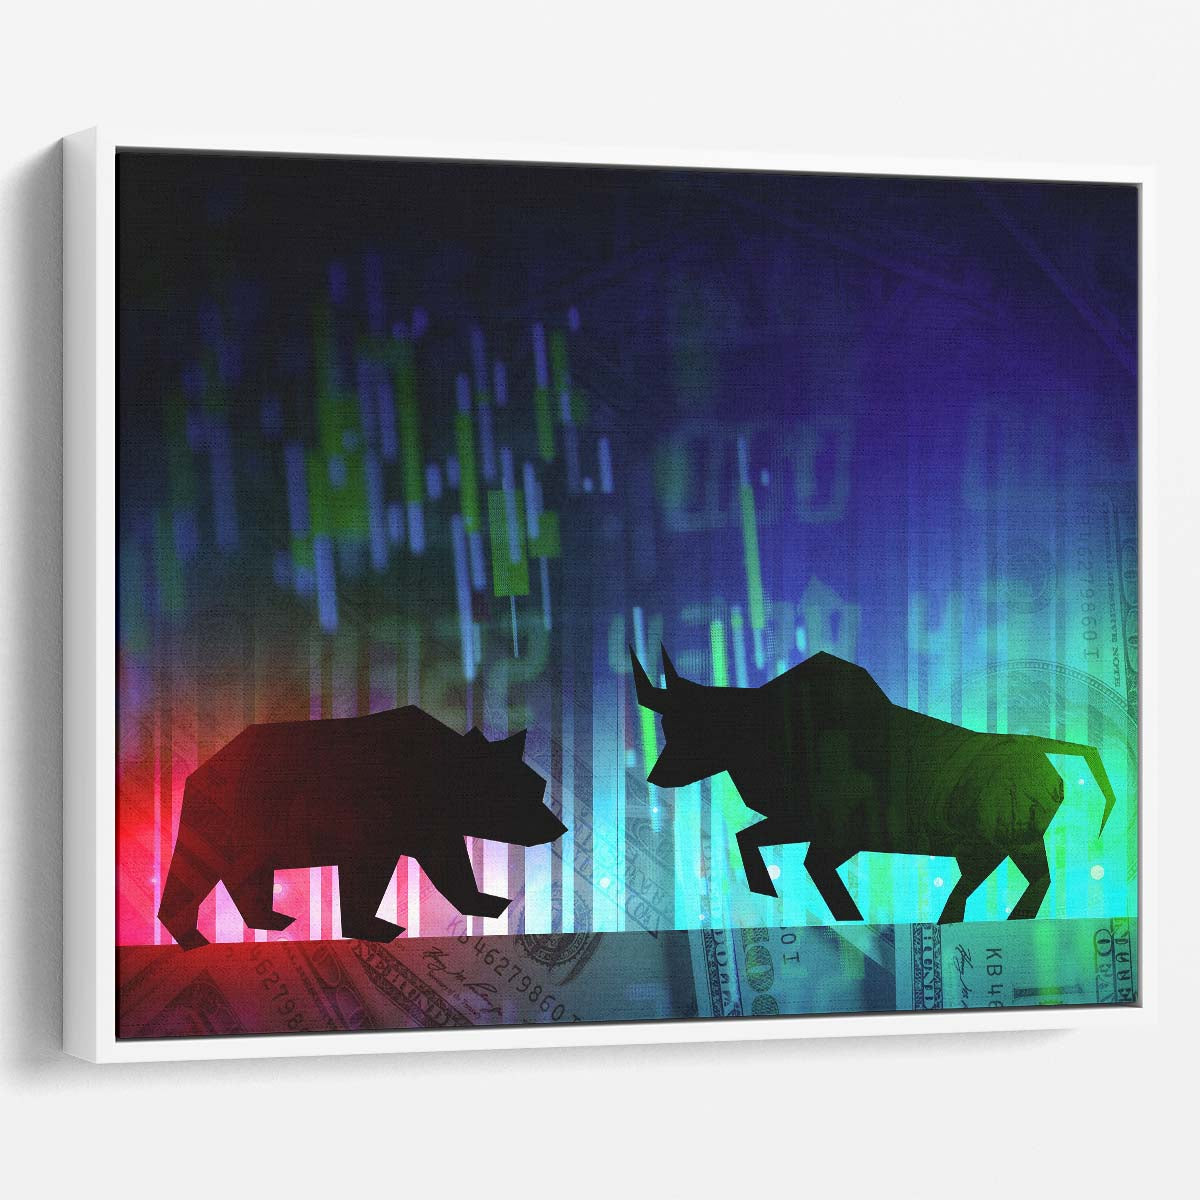 WallStreet Bear and Bull Wall Art by Luxuriance Designs. Made in USA.